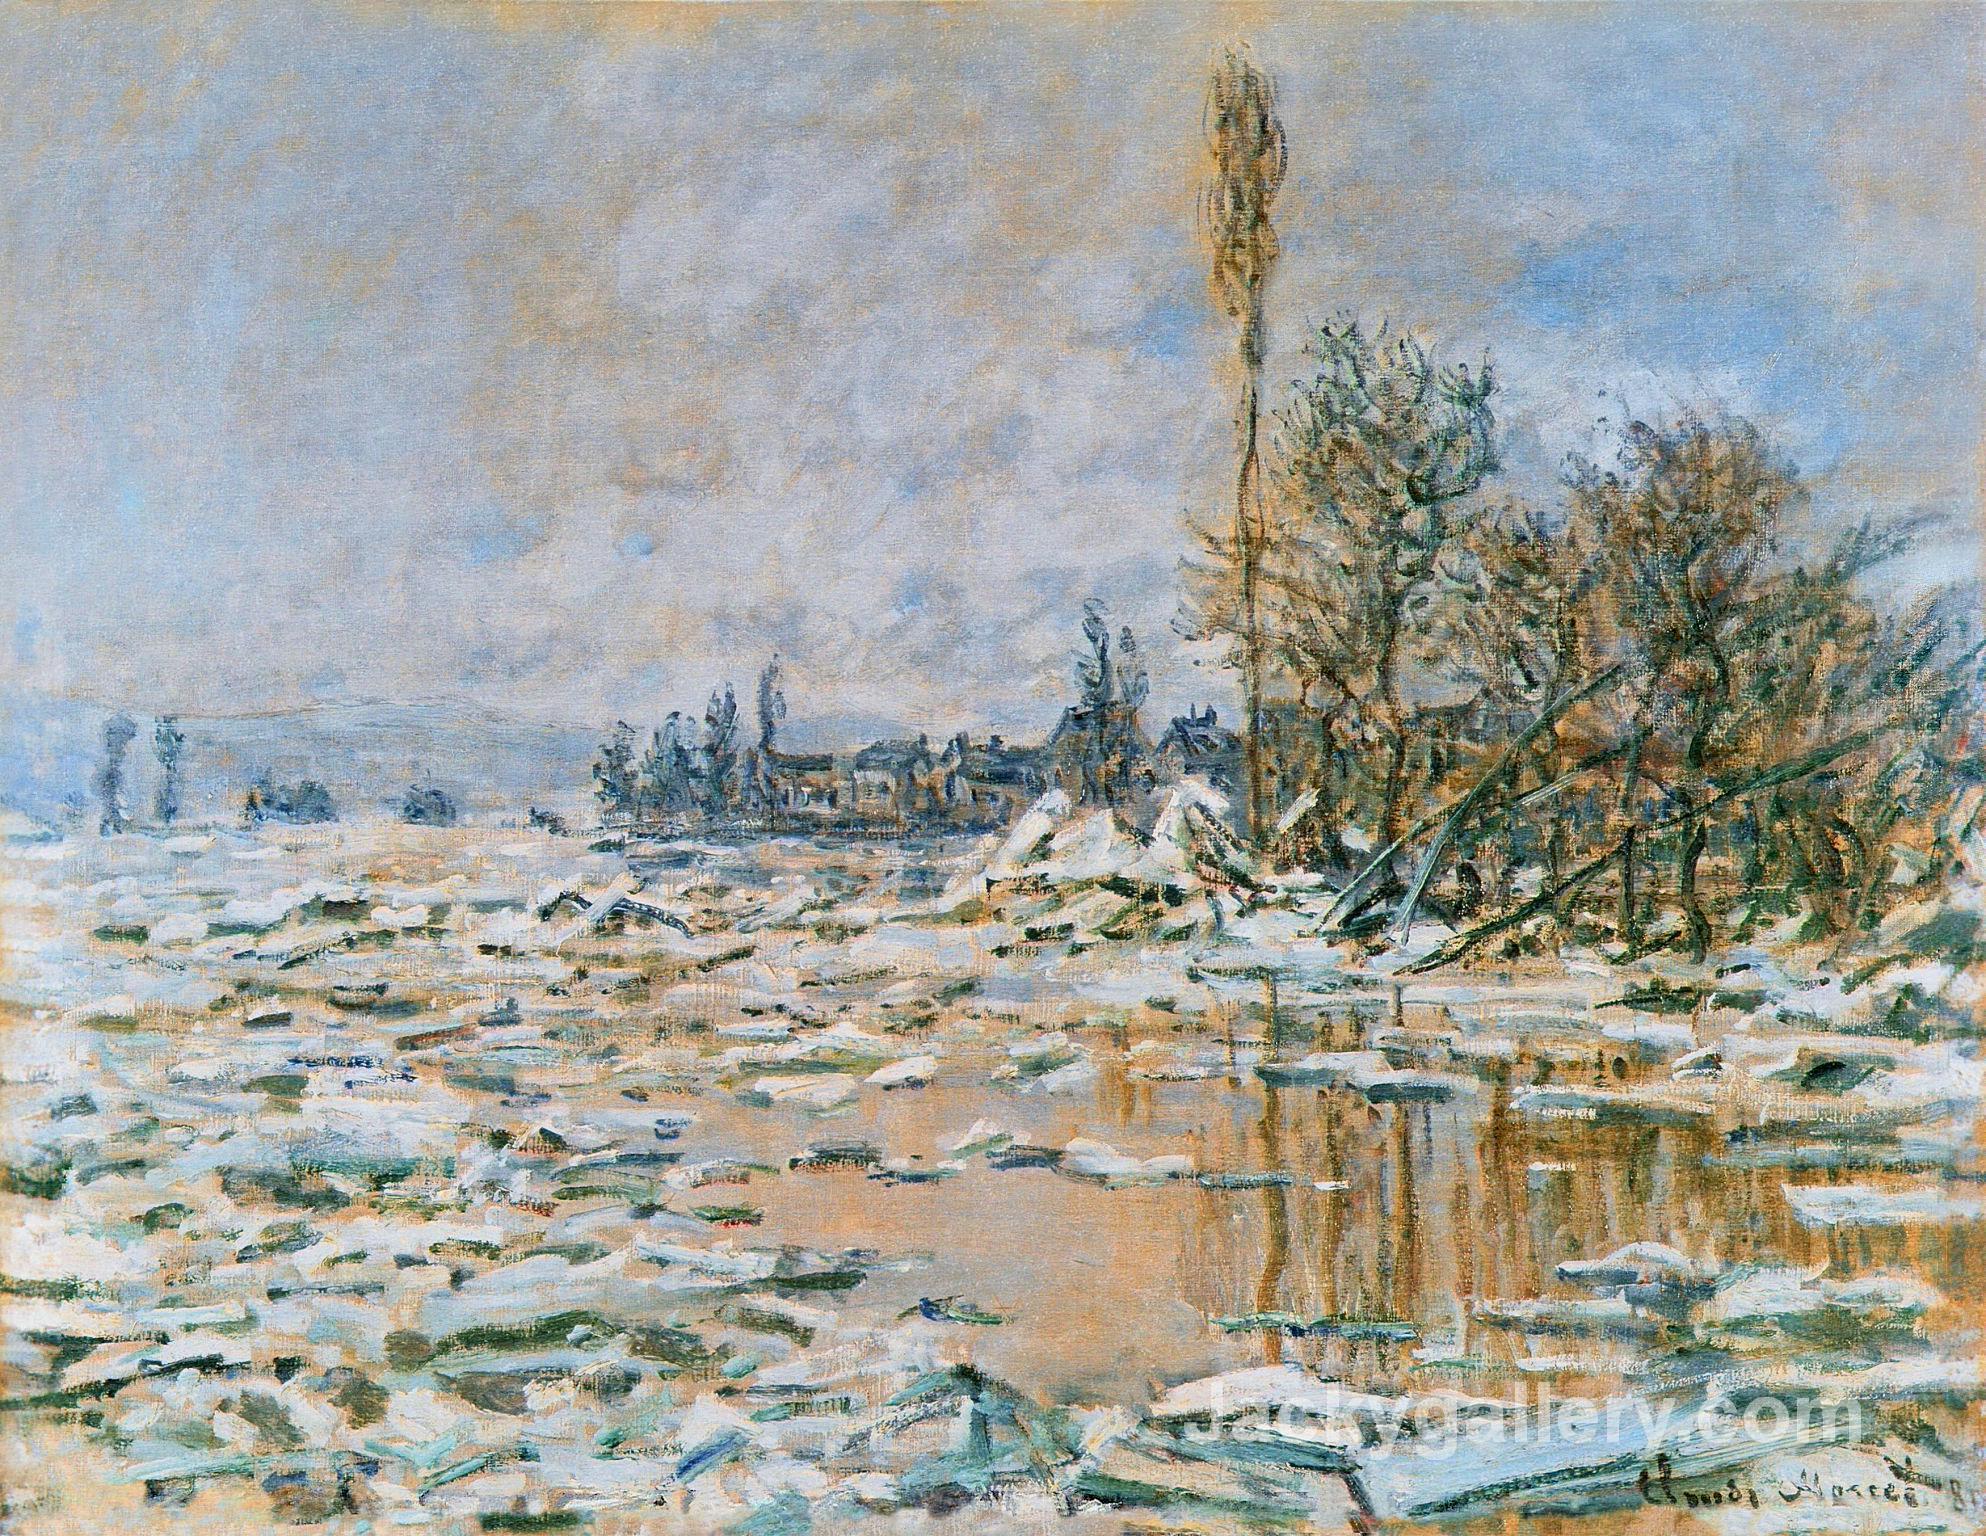 Breakup of Ice, Lavacourt, Grey Weather by Claude Monet paintings reproduction